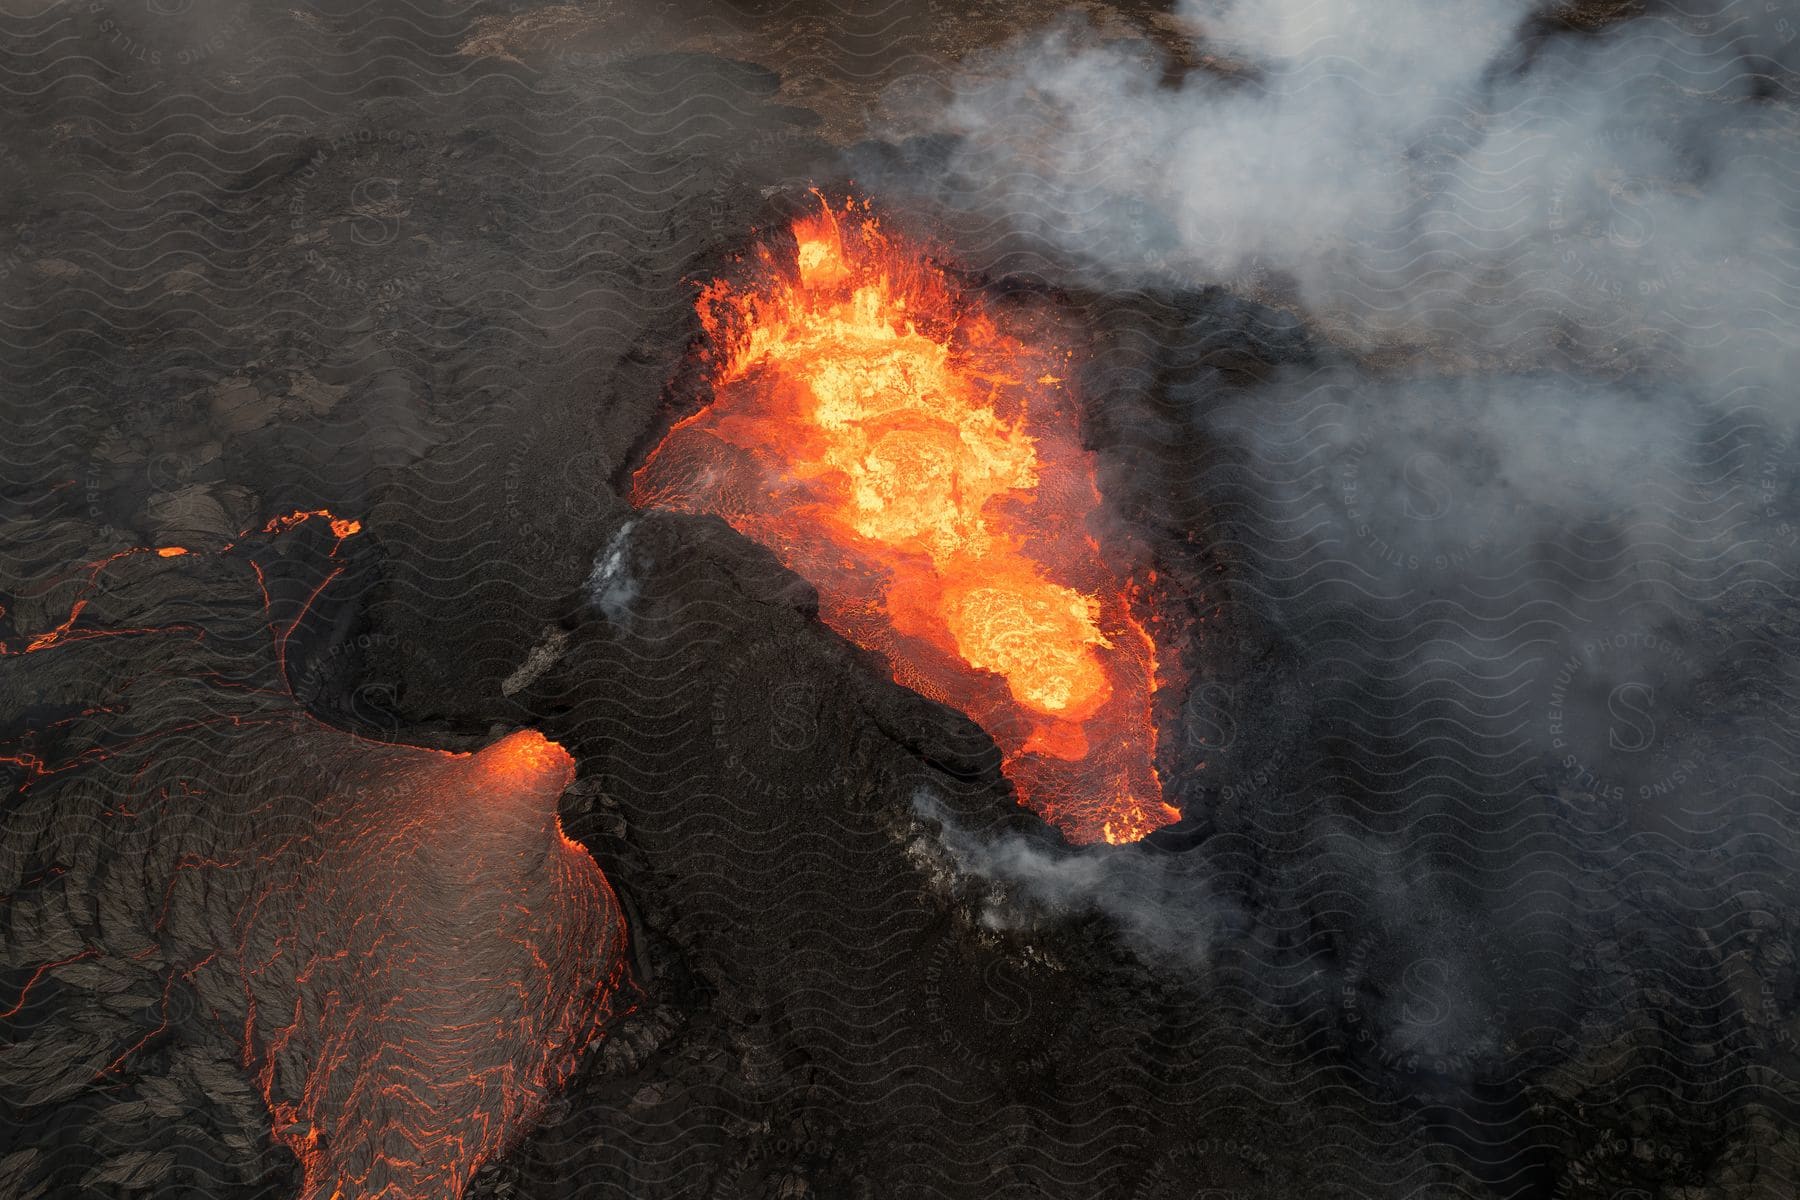 An aerial view of a volcanic eruption with molten lava flows and plumes of smoke.